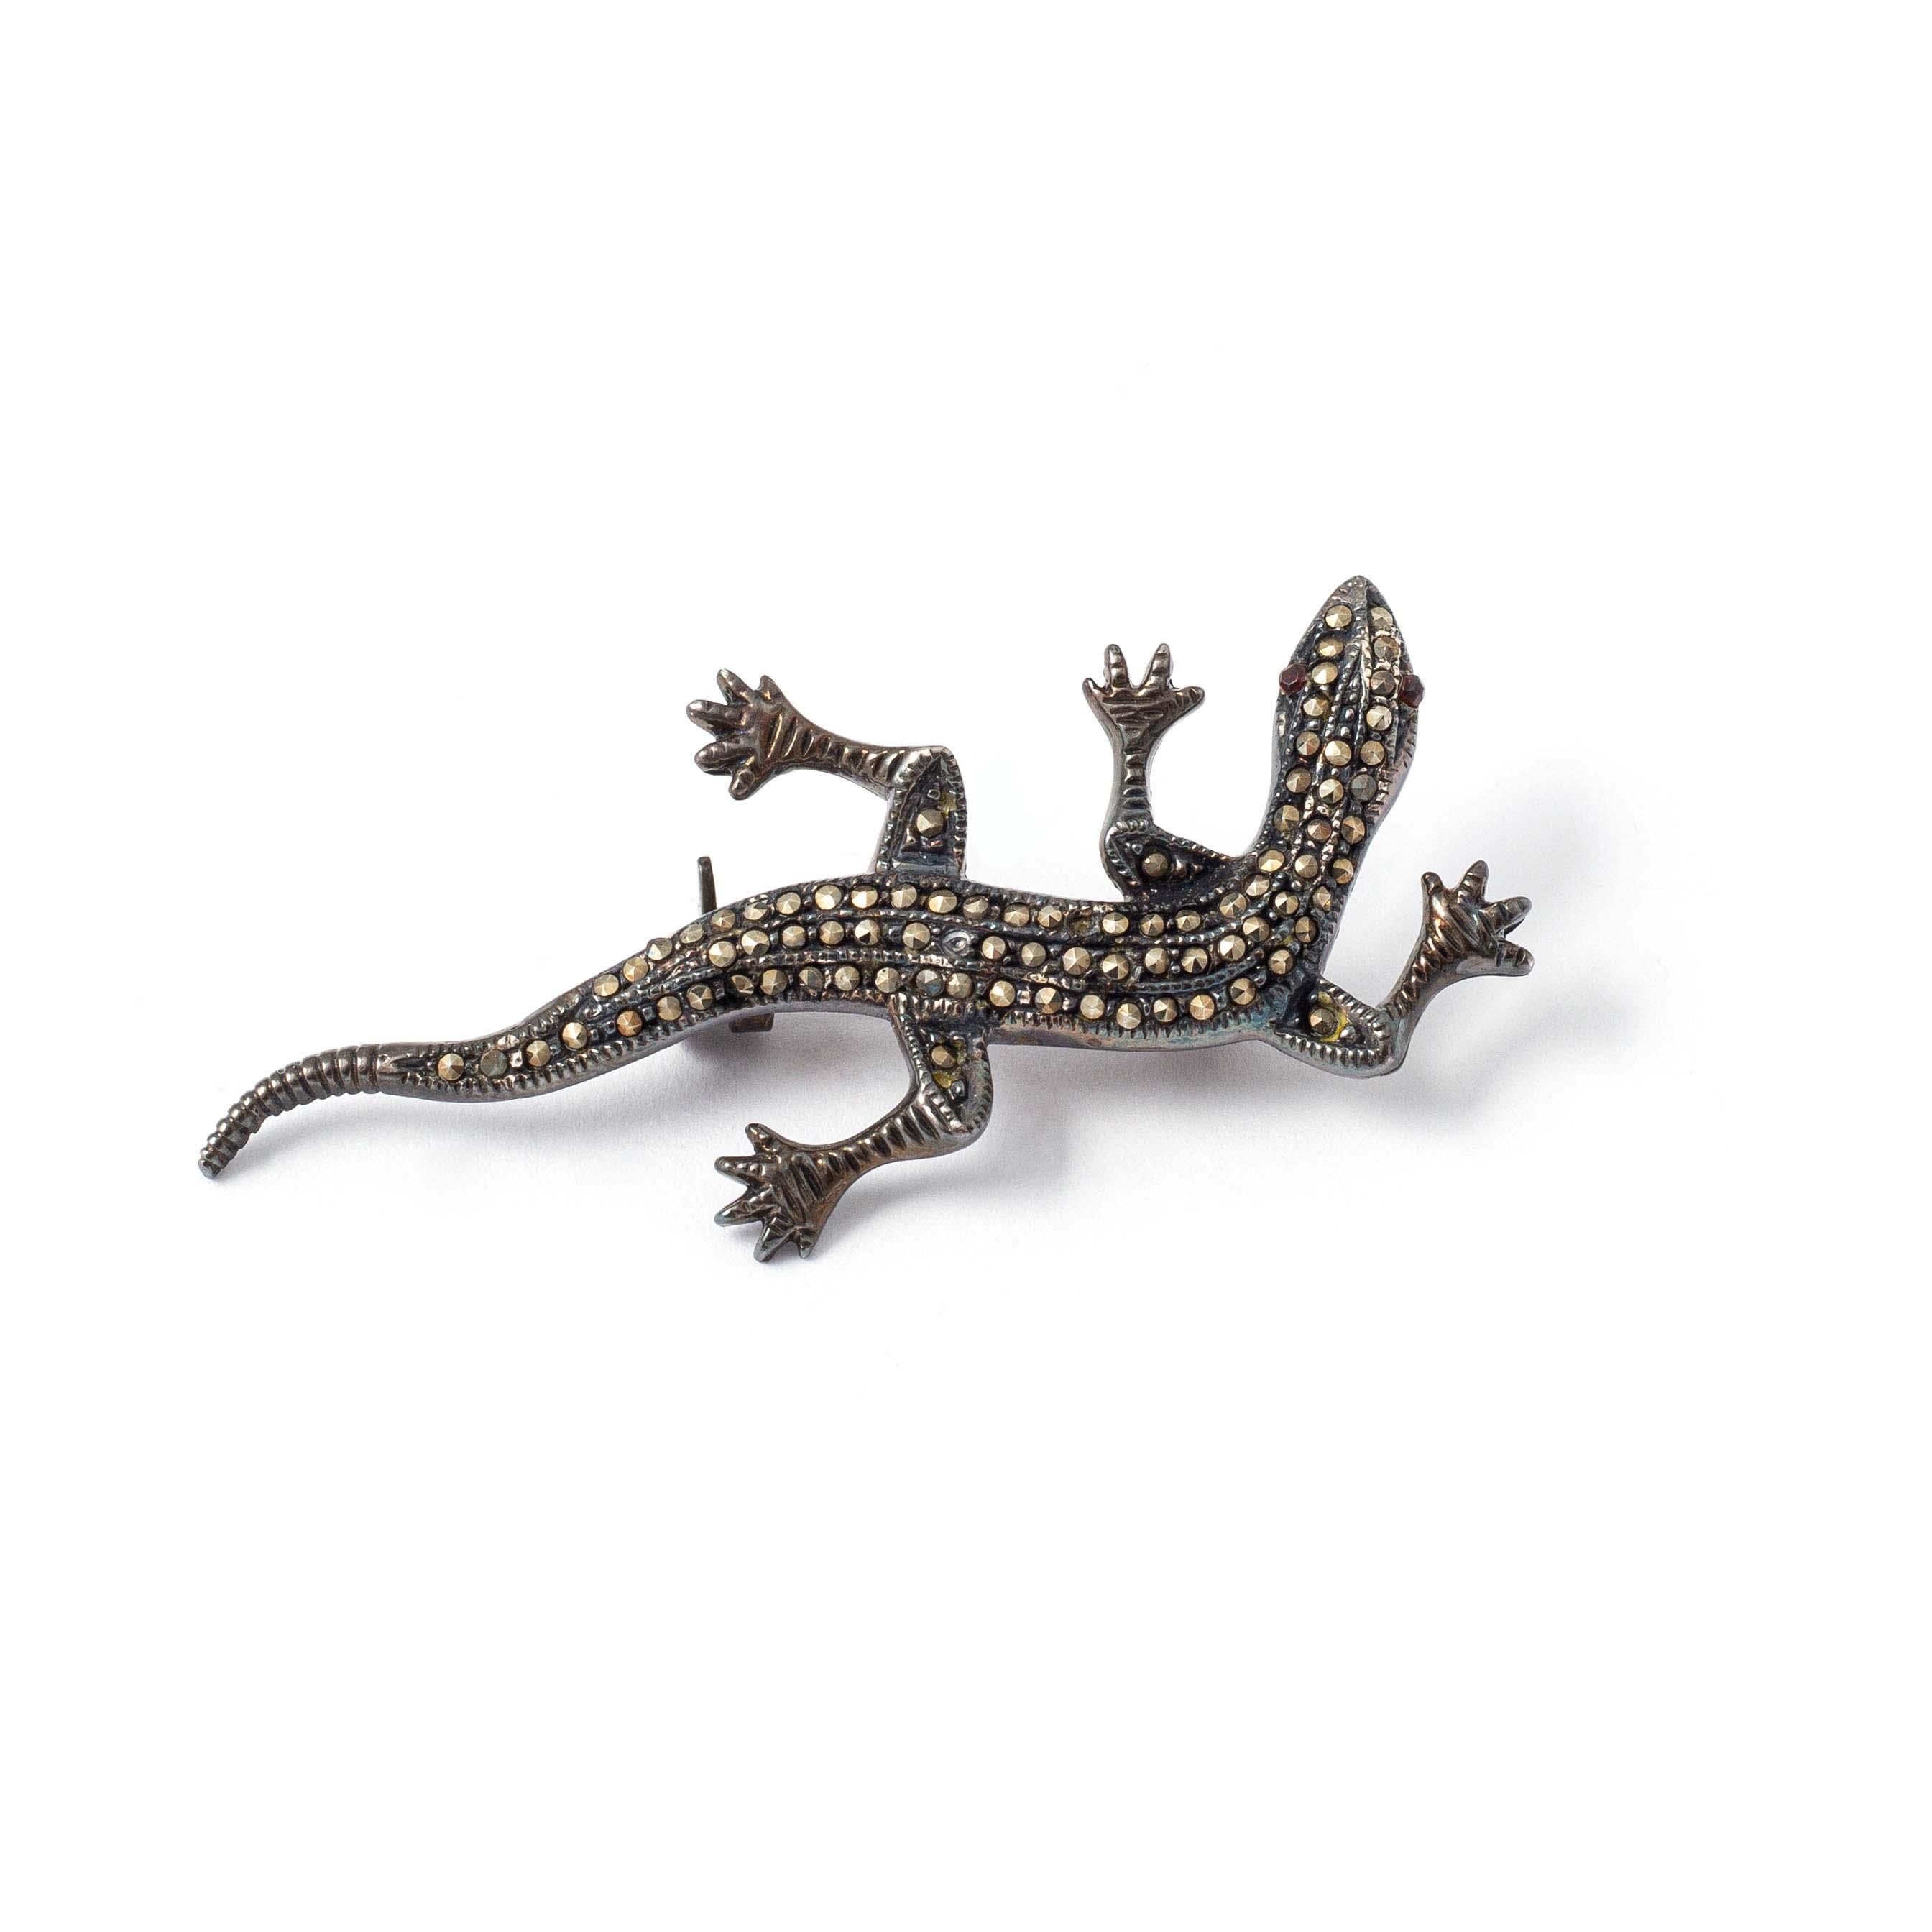 Set of four silver brooches representing salamanders.
Mid-20th century. 
Lengths from 5.30 centimeters to 7.50 centimeters. 
Gross weight: 28.83 grams.